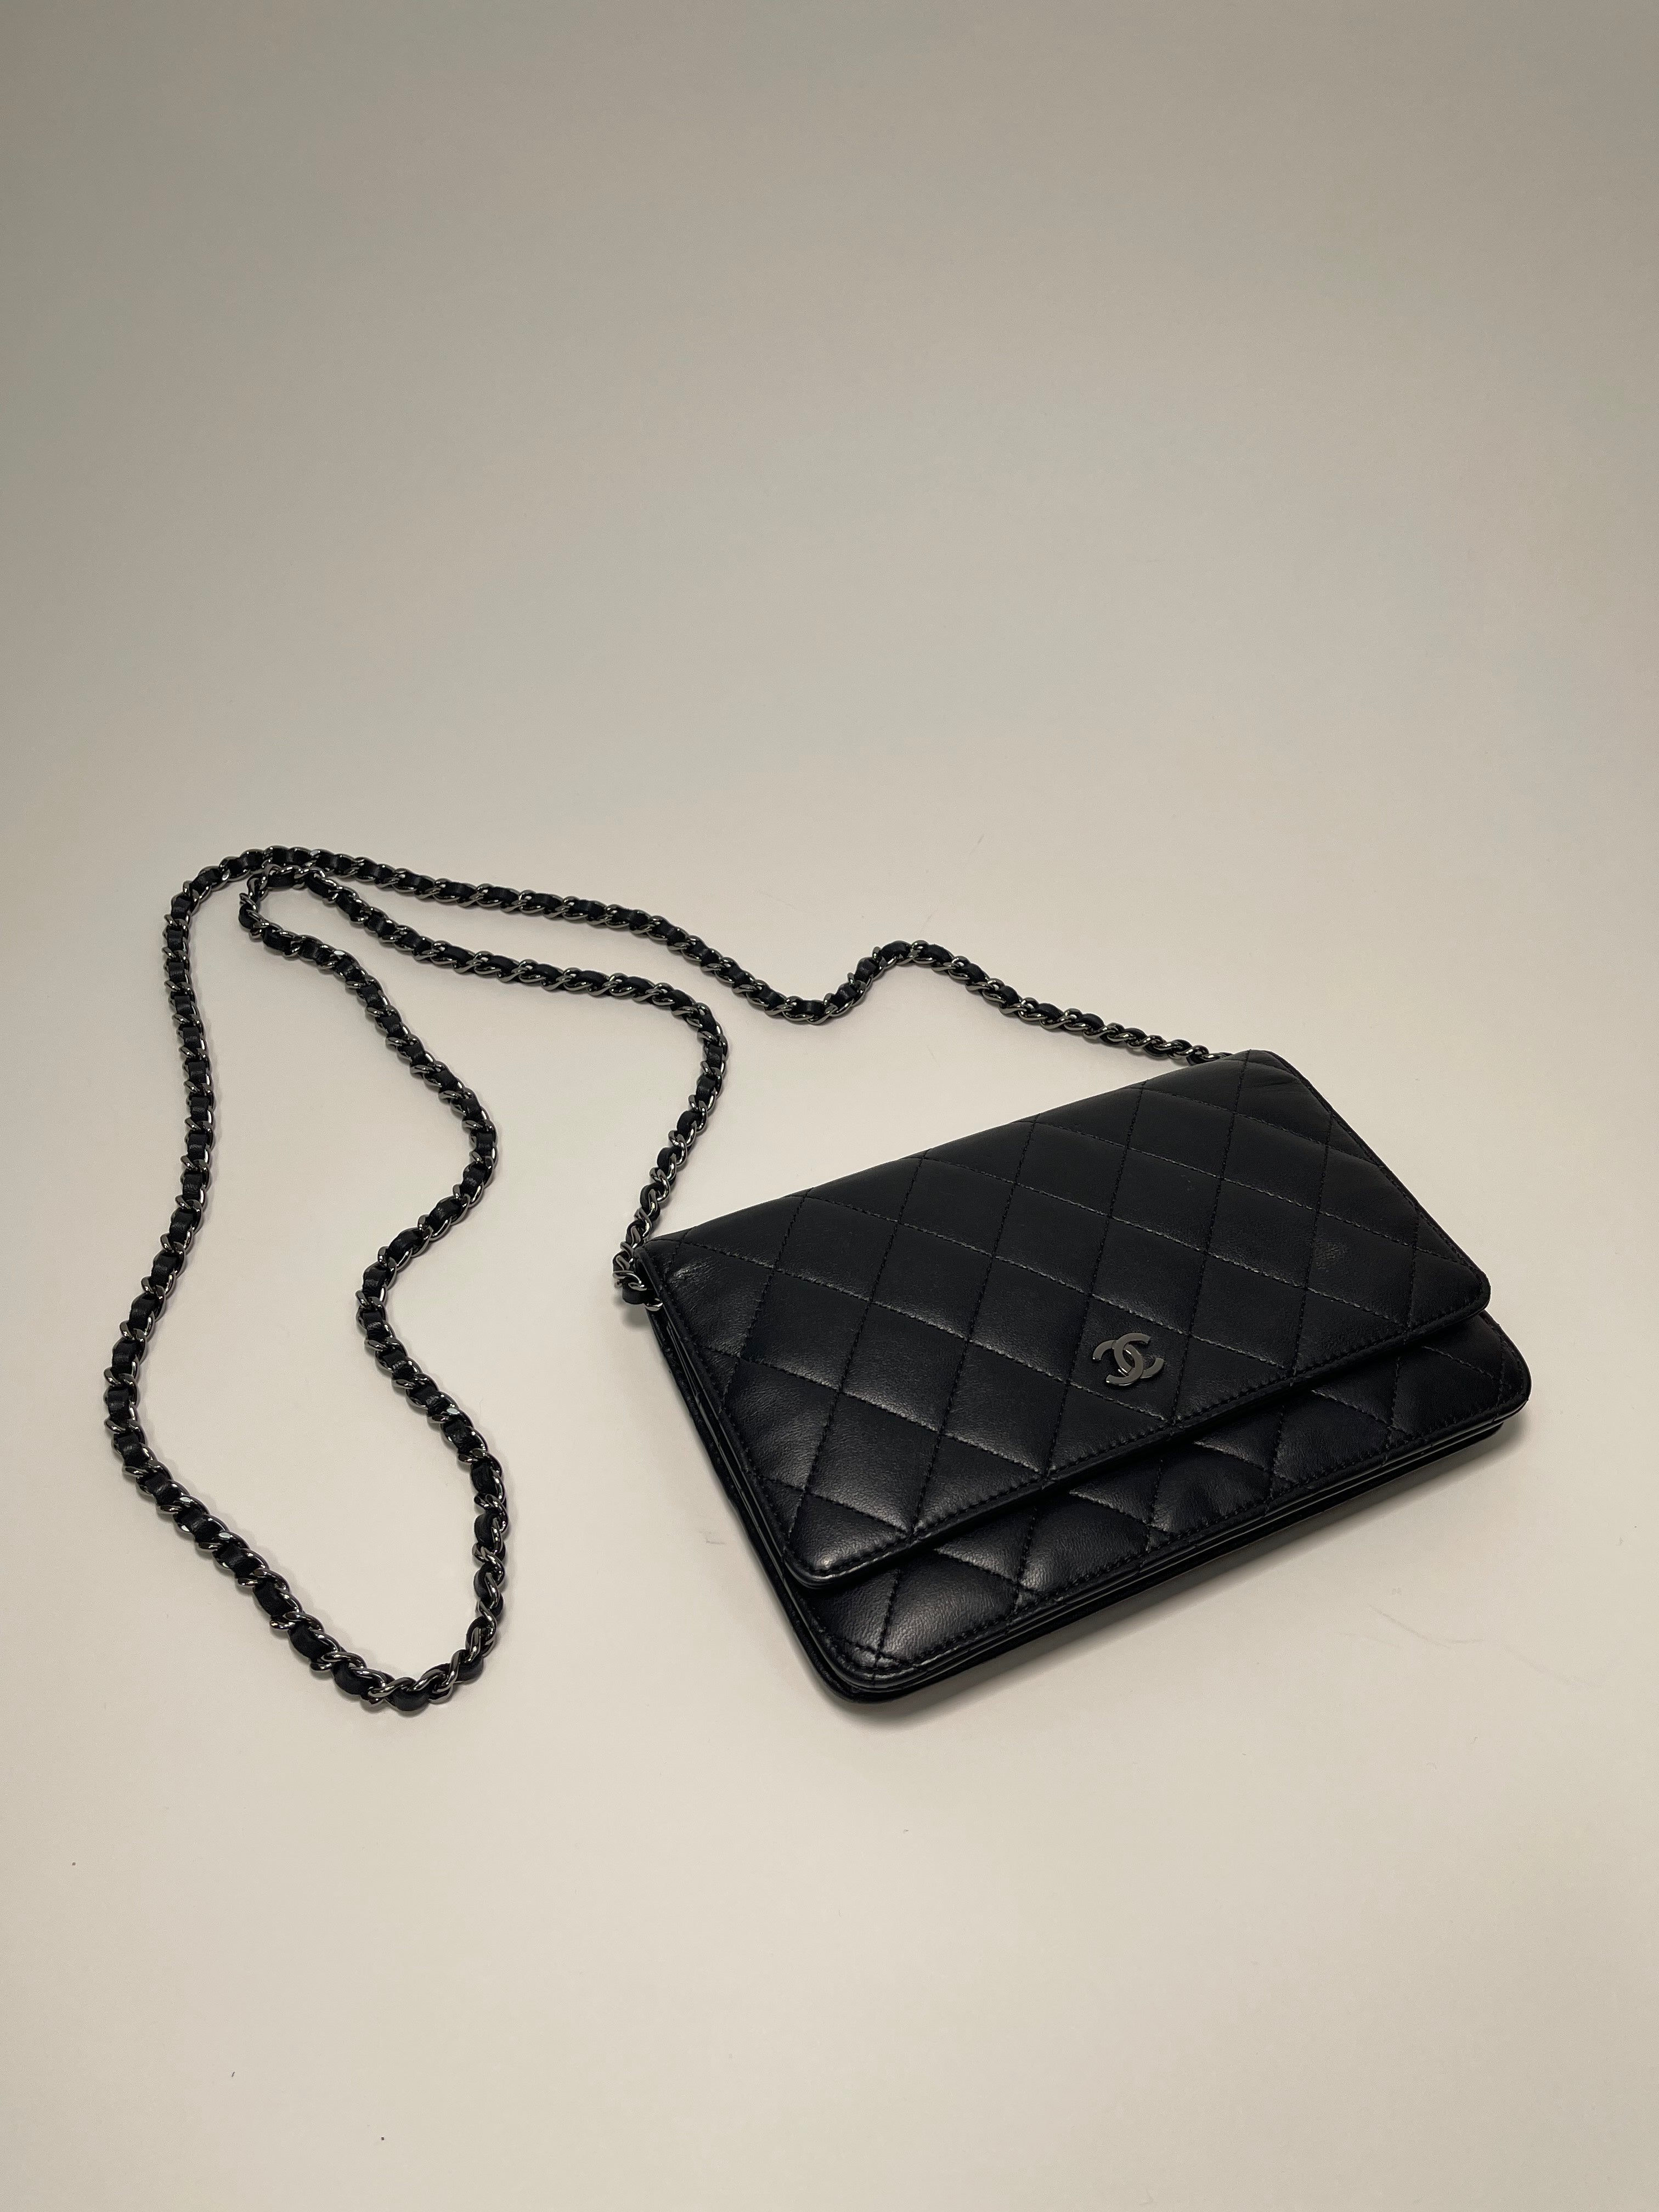 WOC Wallet on Chain Quilted Lambskin Leather with Black Interior  Bag  Religion